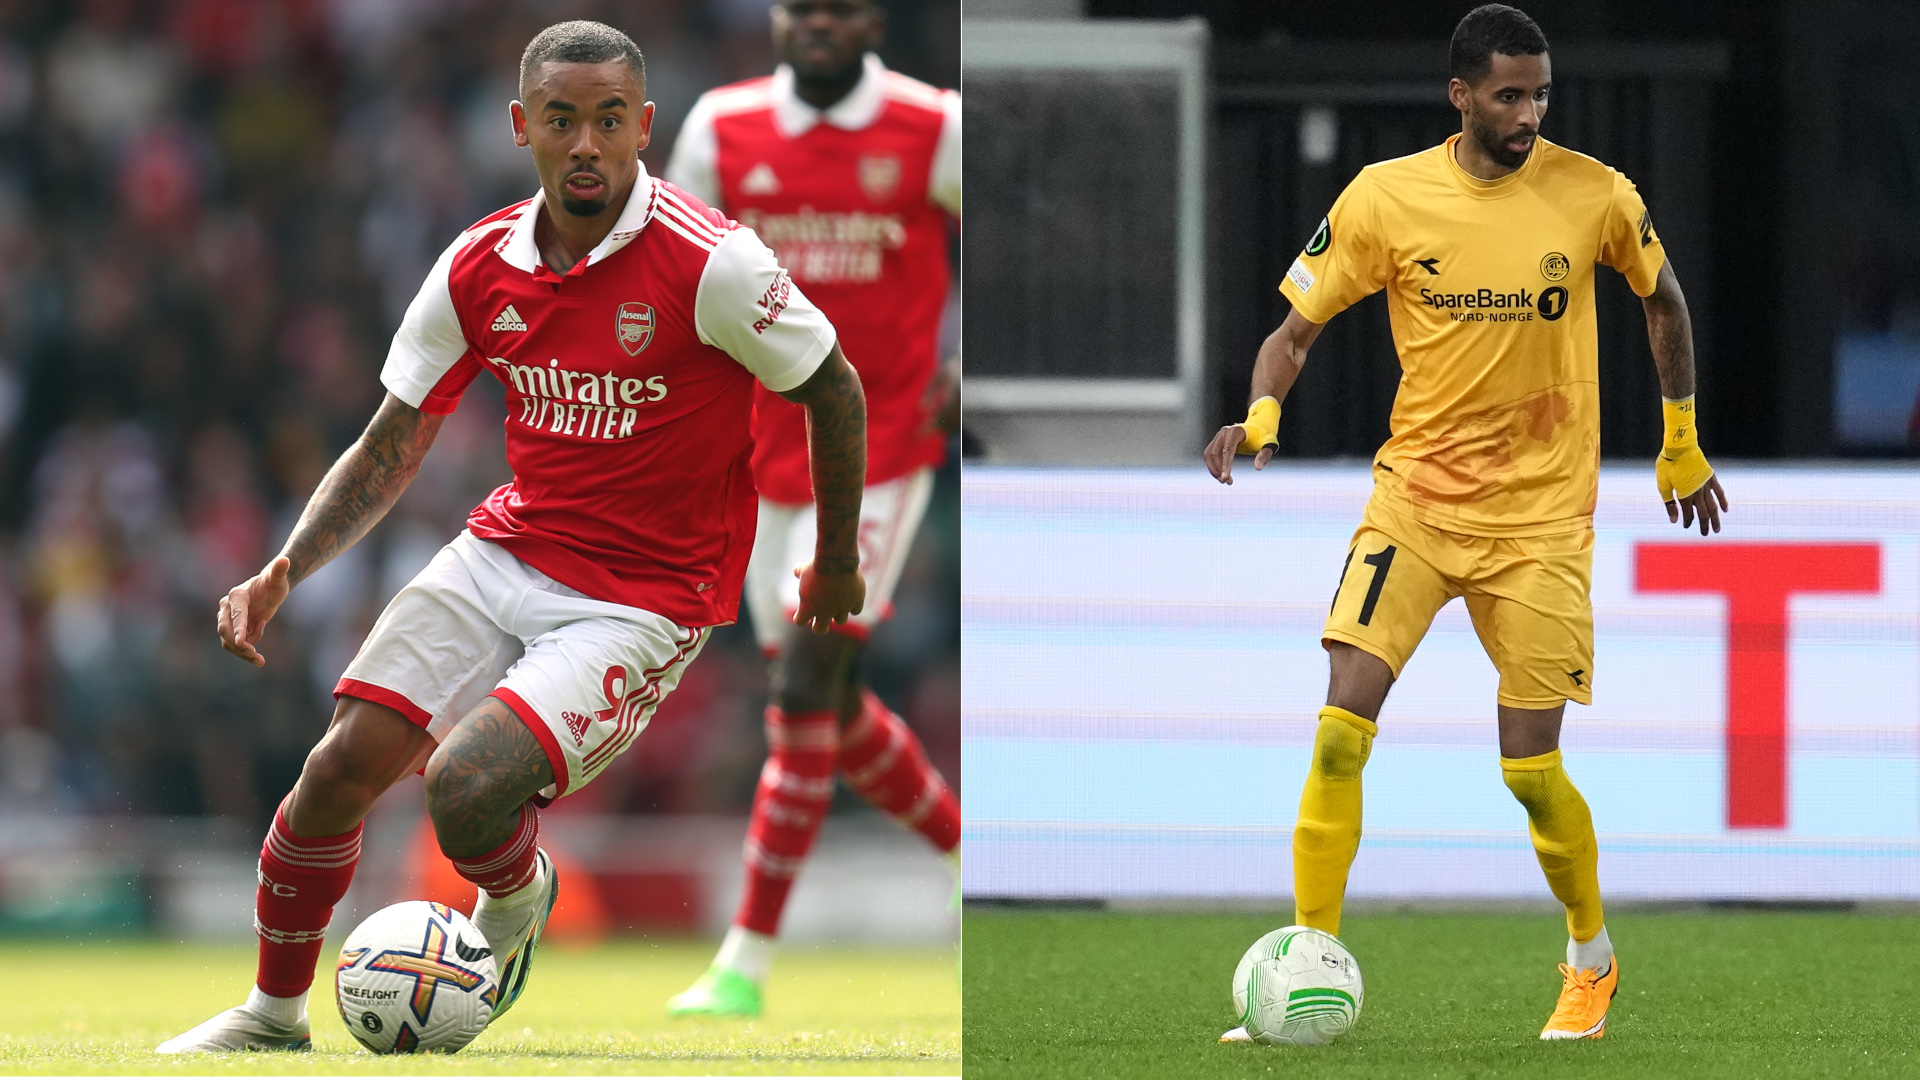 Arsenal vs Bodo/Glimt live stream how to watch Europa League online and on TV from anywhere, team news TechRadar